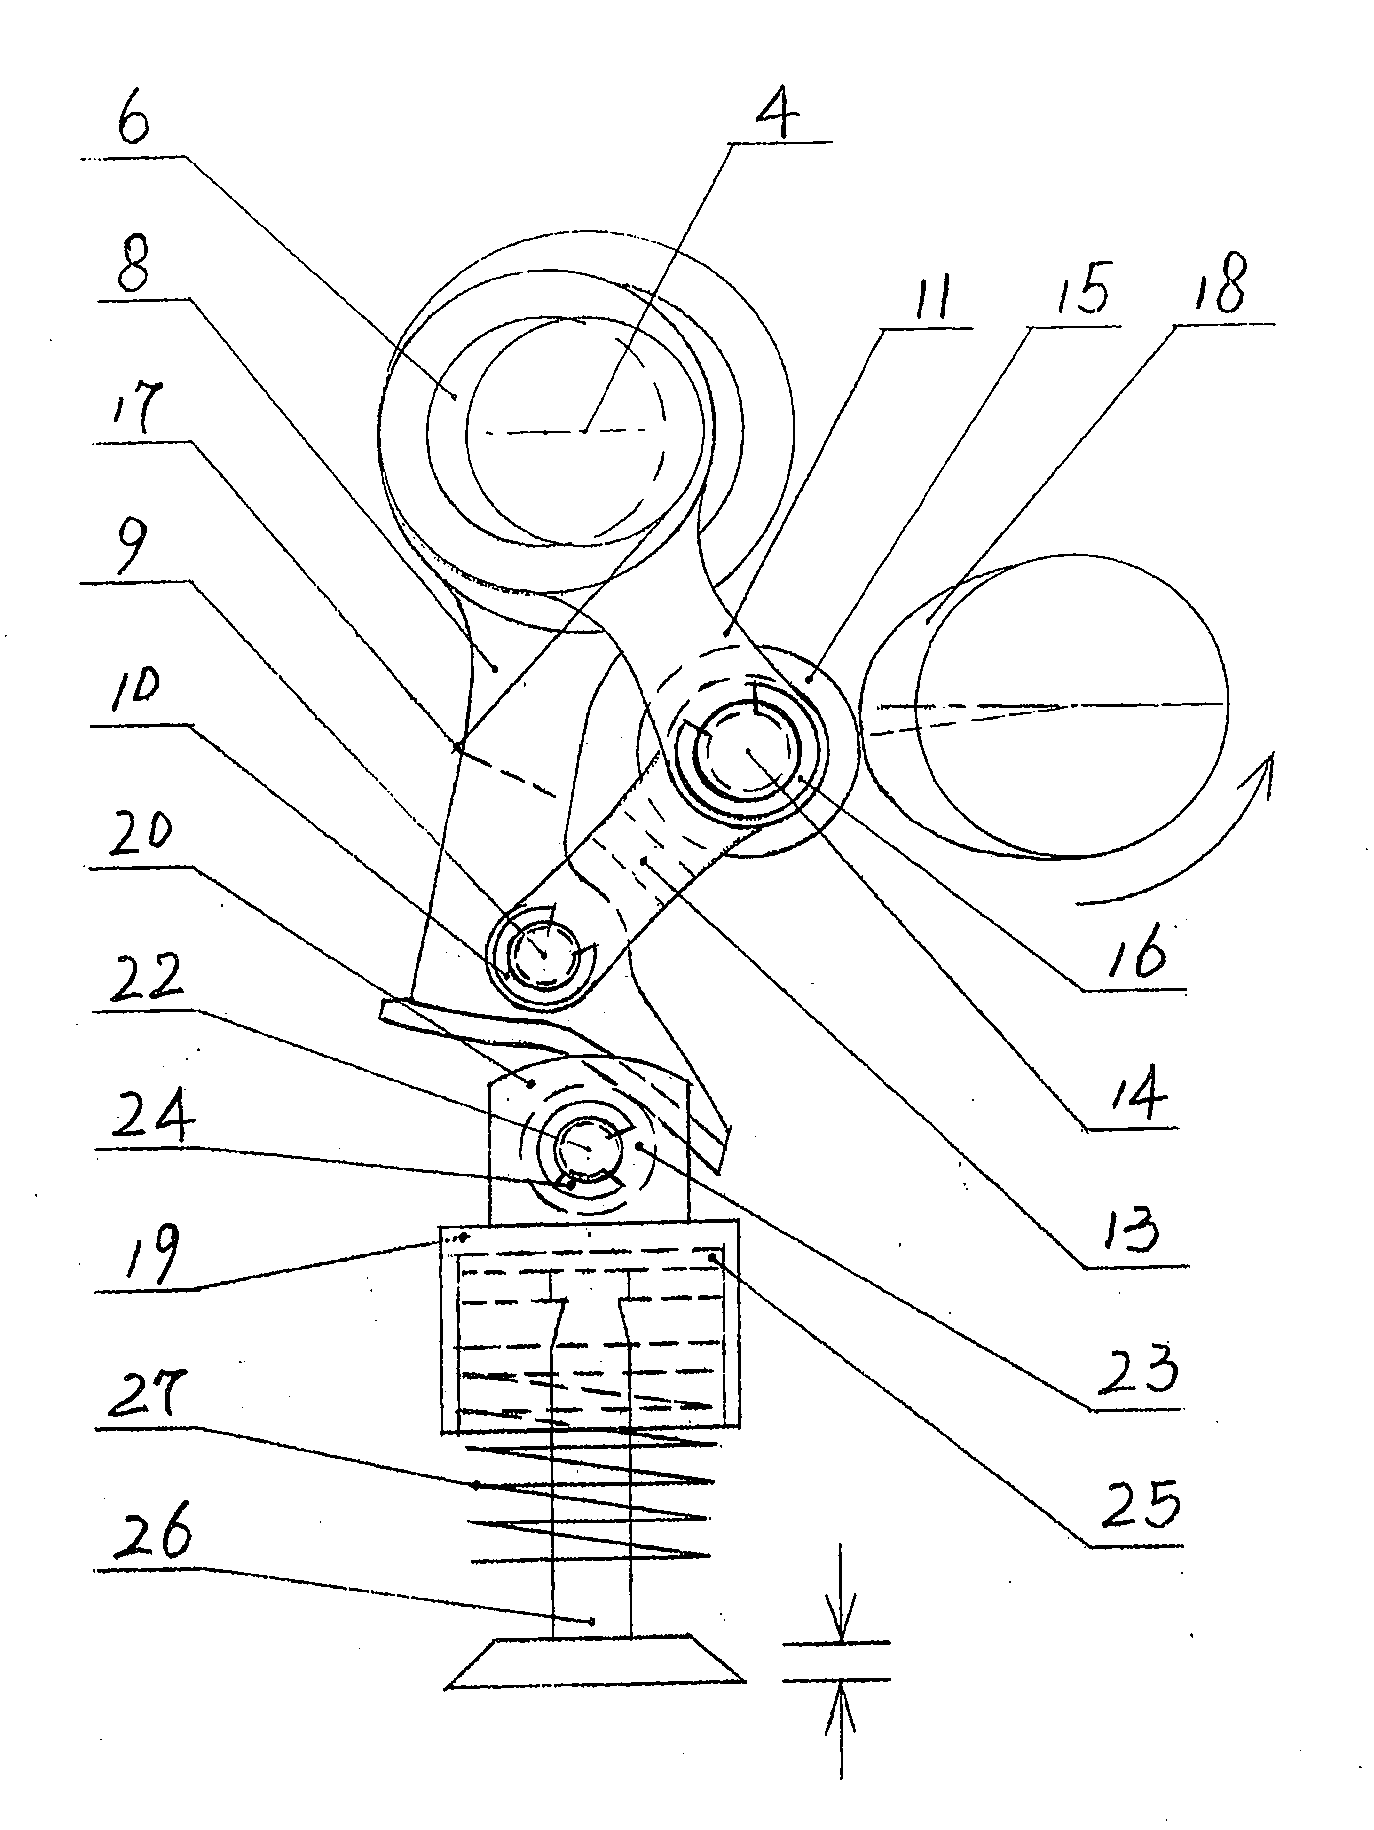 Two-in-one mechanism of continuous variable valve stroke and valve timing of automobile engine